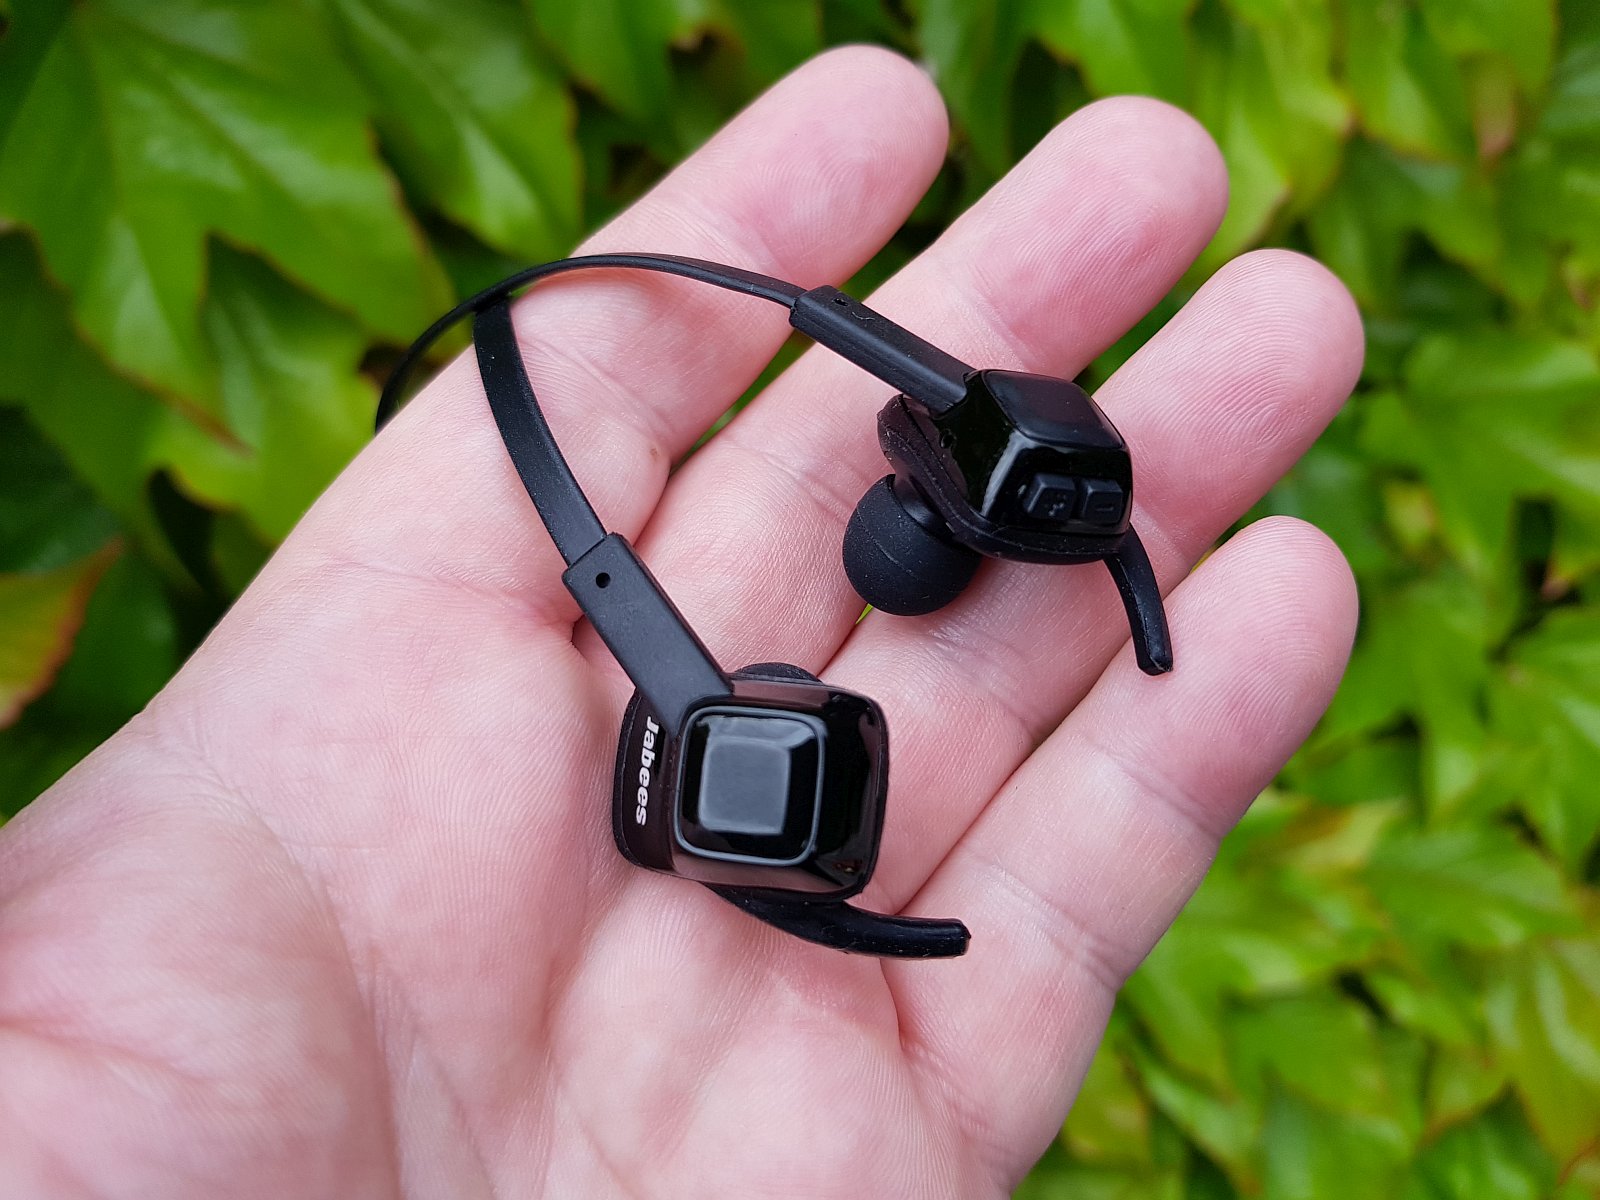 BeatING Plus Wireless Bluetooth 4.1 Earphones with Microphone